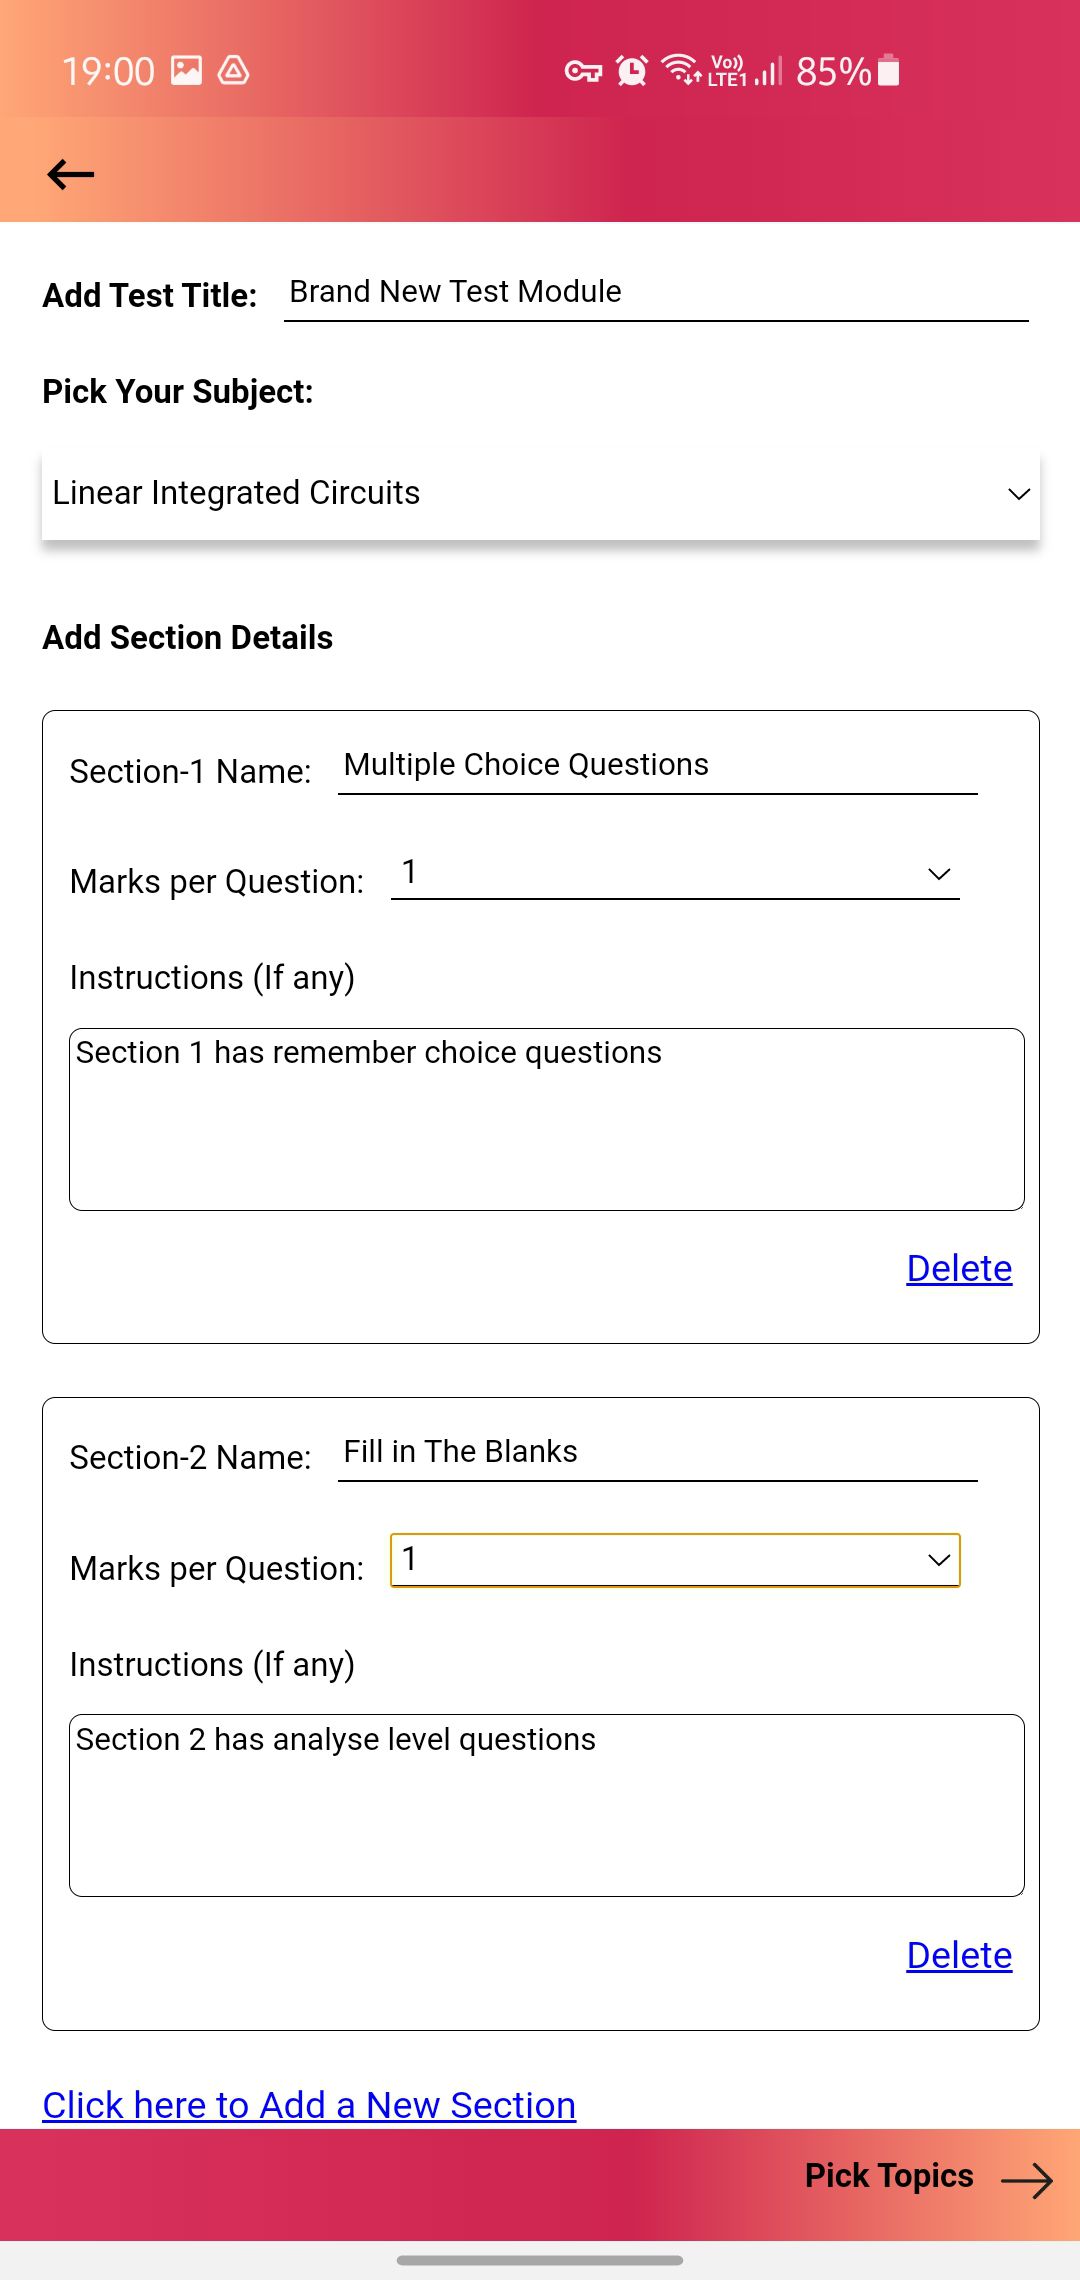 7. After Filling all the required Details on the Test Summary screen you’ll be able to click on “Pick Topics” option.